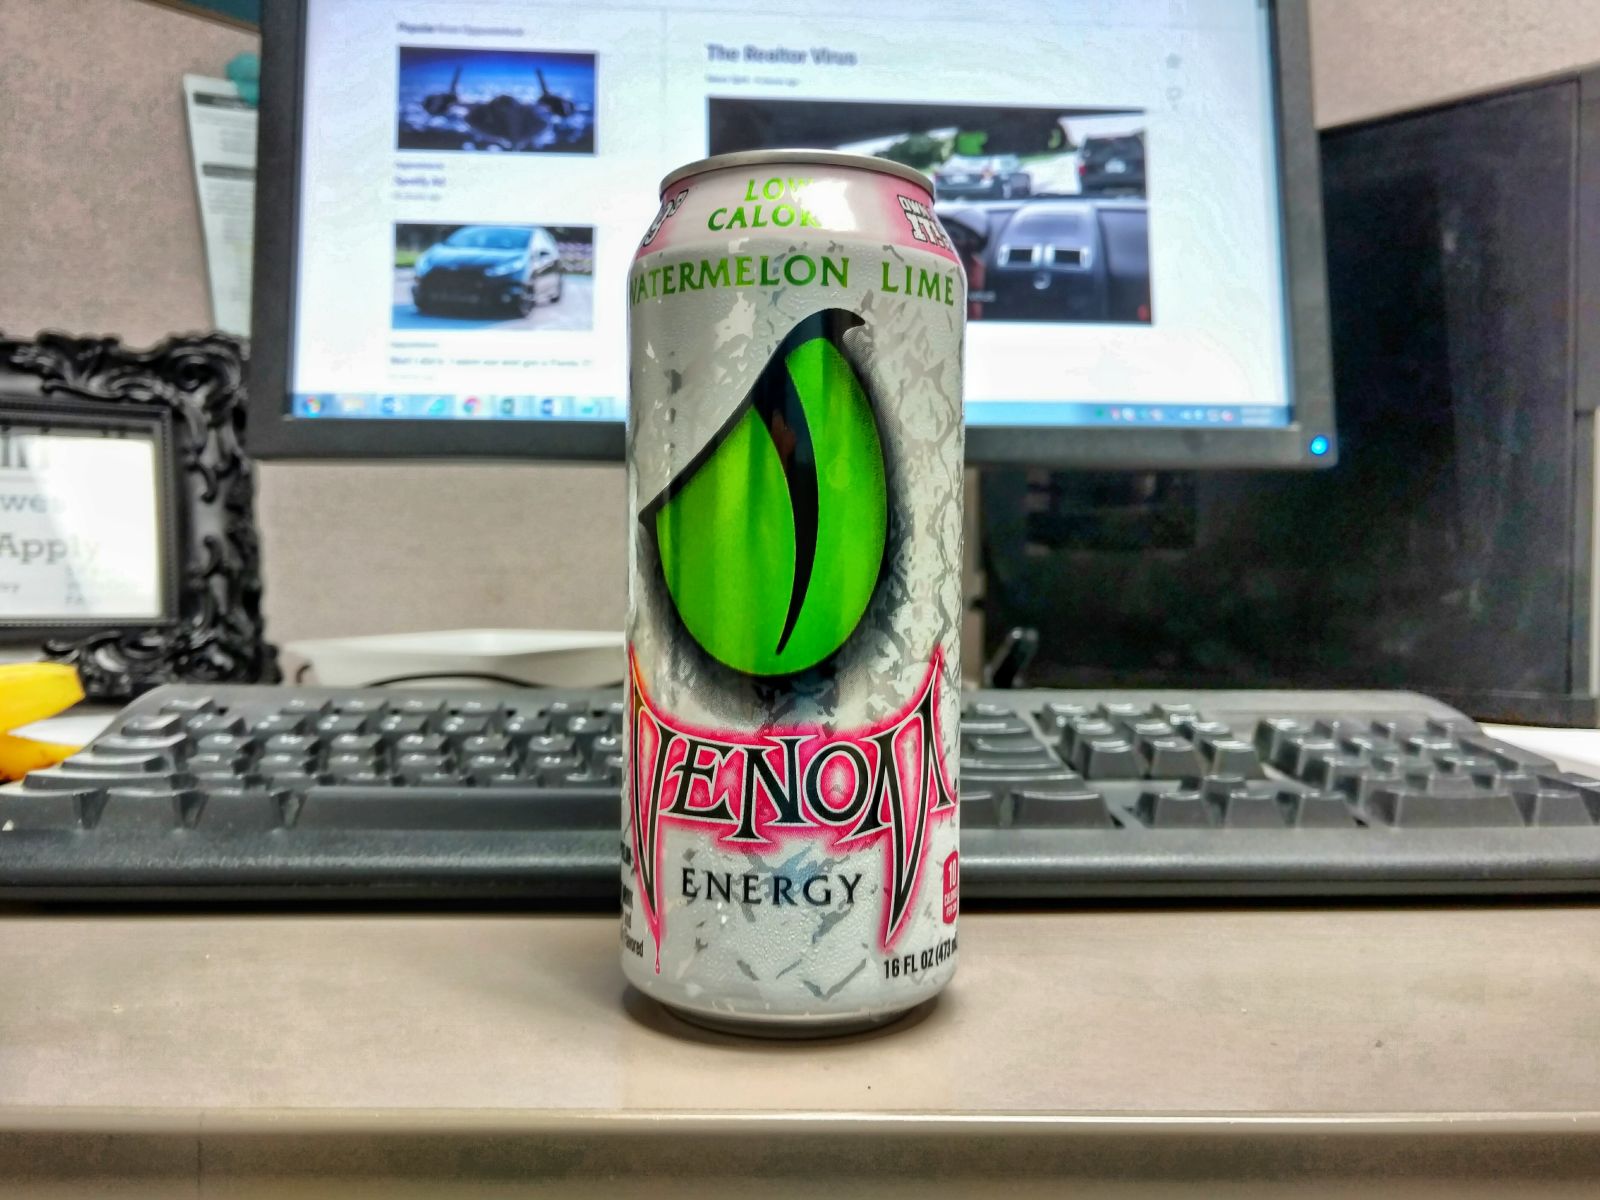 Illustration for article titled Venom Energy Low Calorie Watermelon Lime is a watermelon Jolly Rancher flavored energy drink